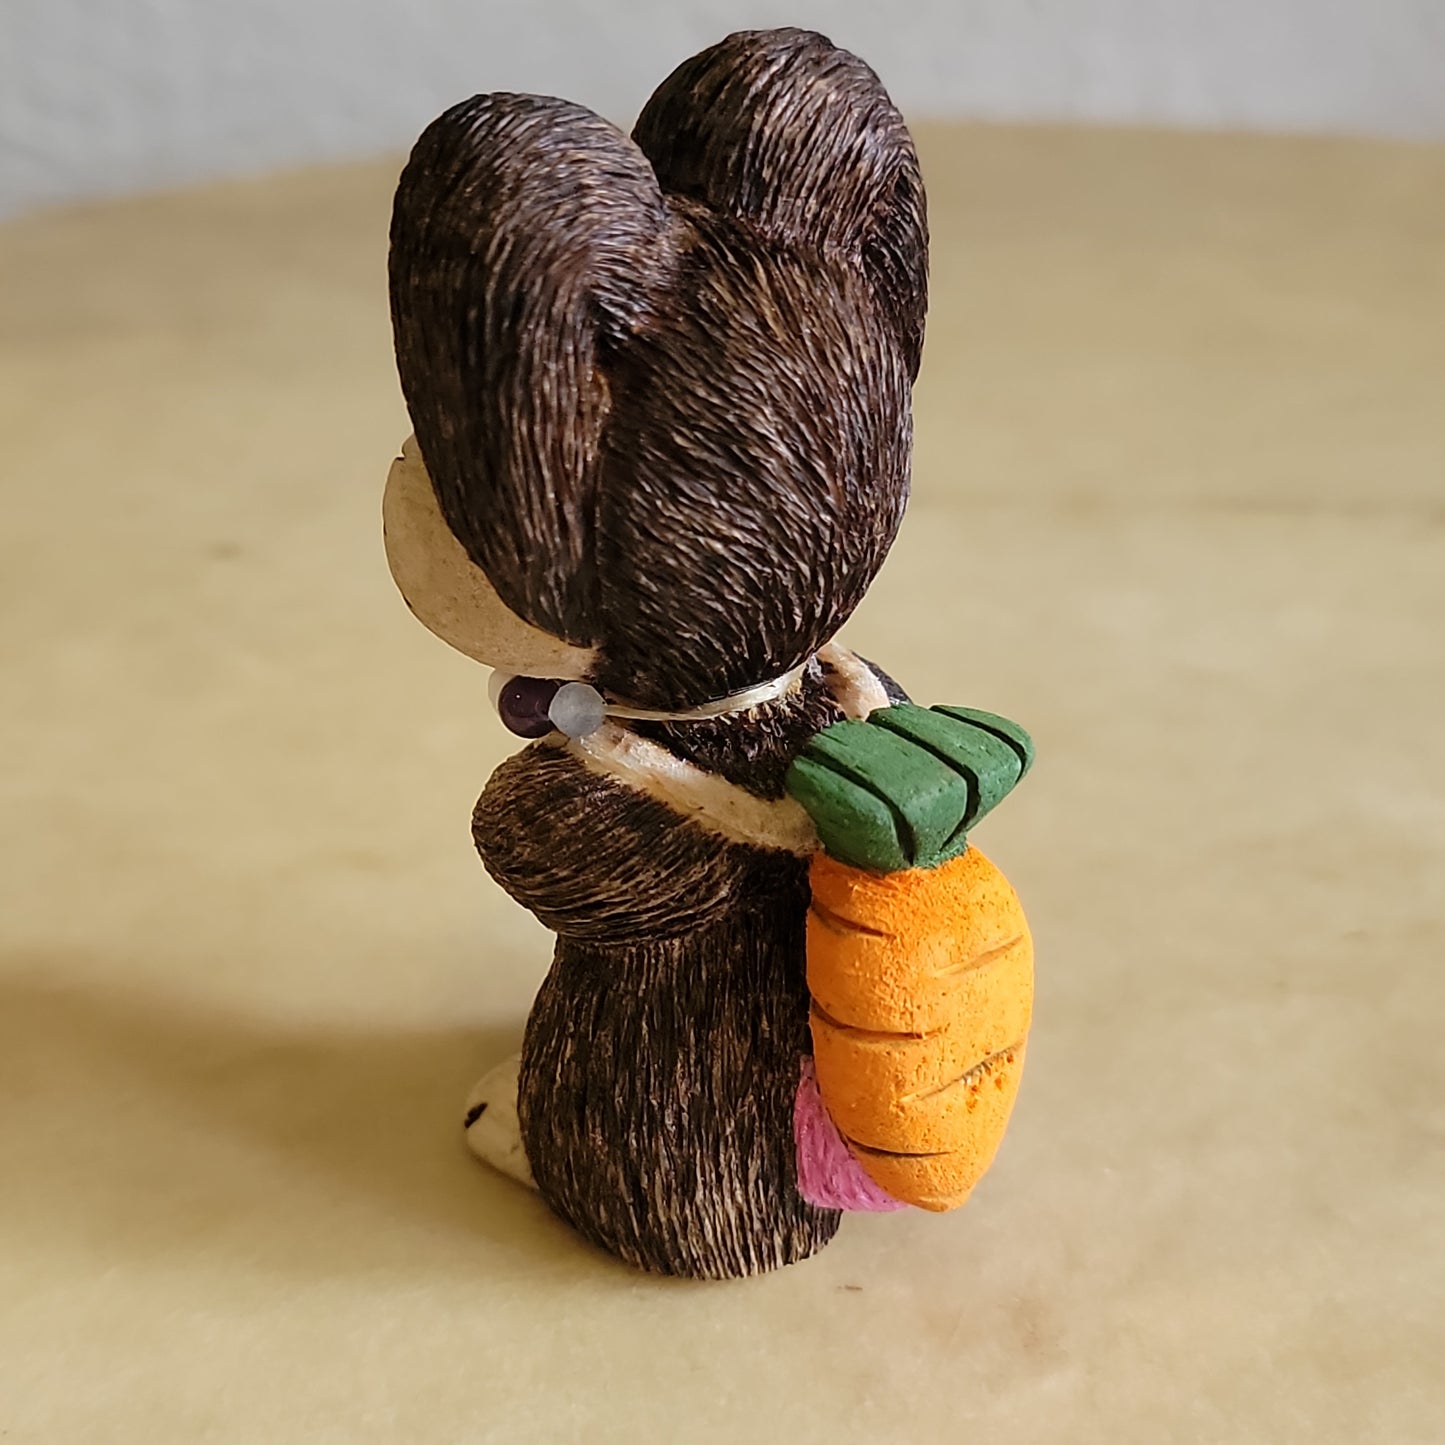 Elise Westika Bunny Rabbit w/Carrot and Fancy Necklace "Just in time for Easter" Zuni Fetish